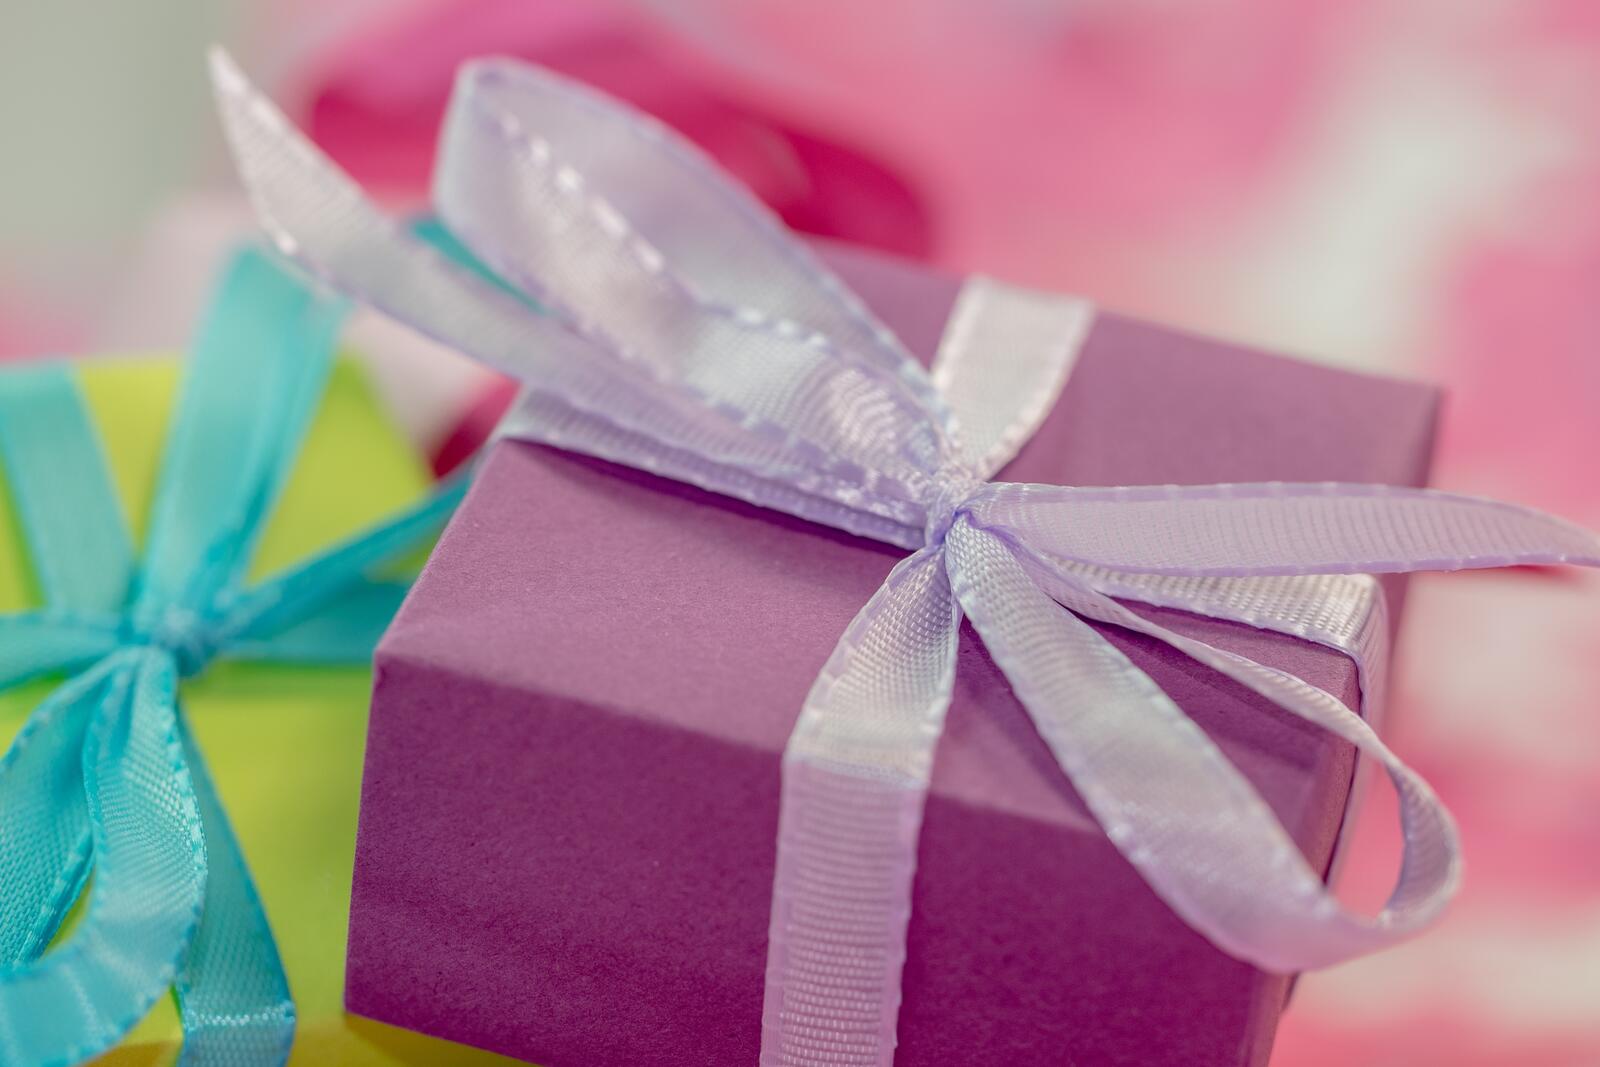 Free photo A pink-colored gift box